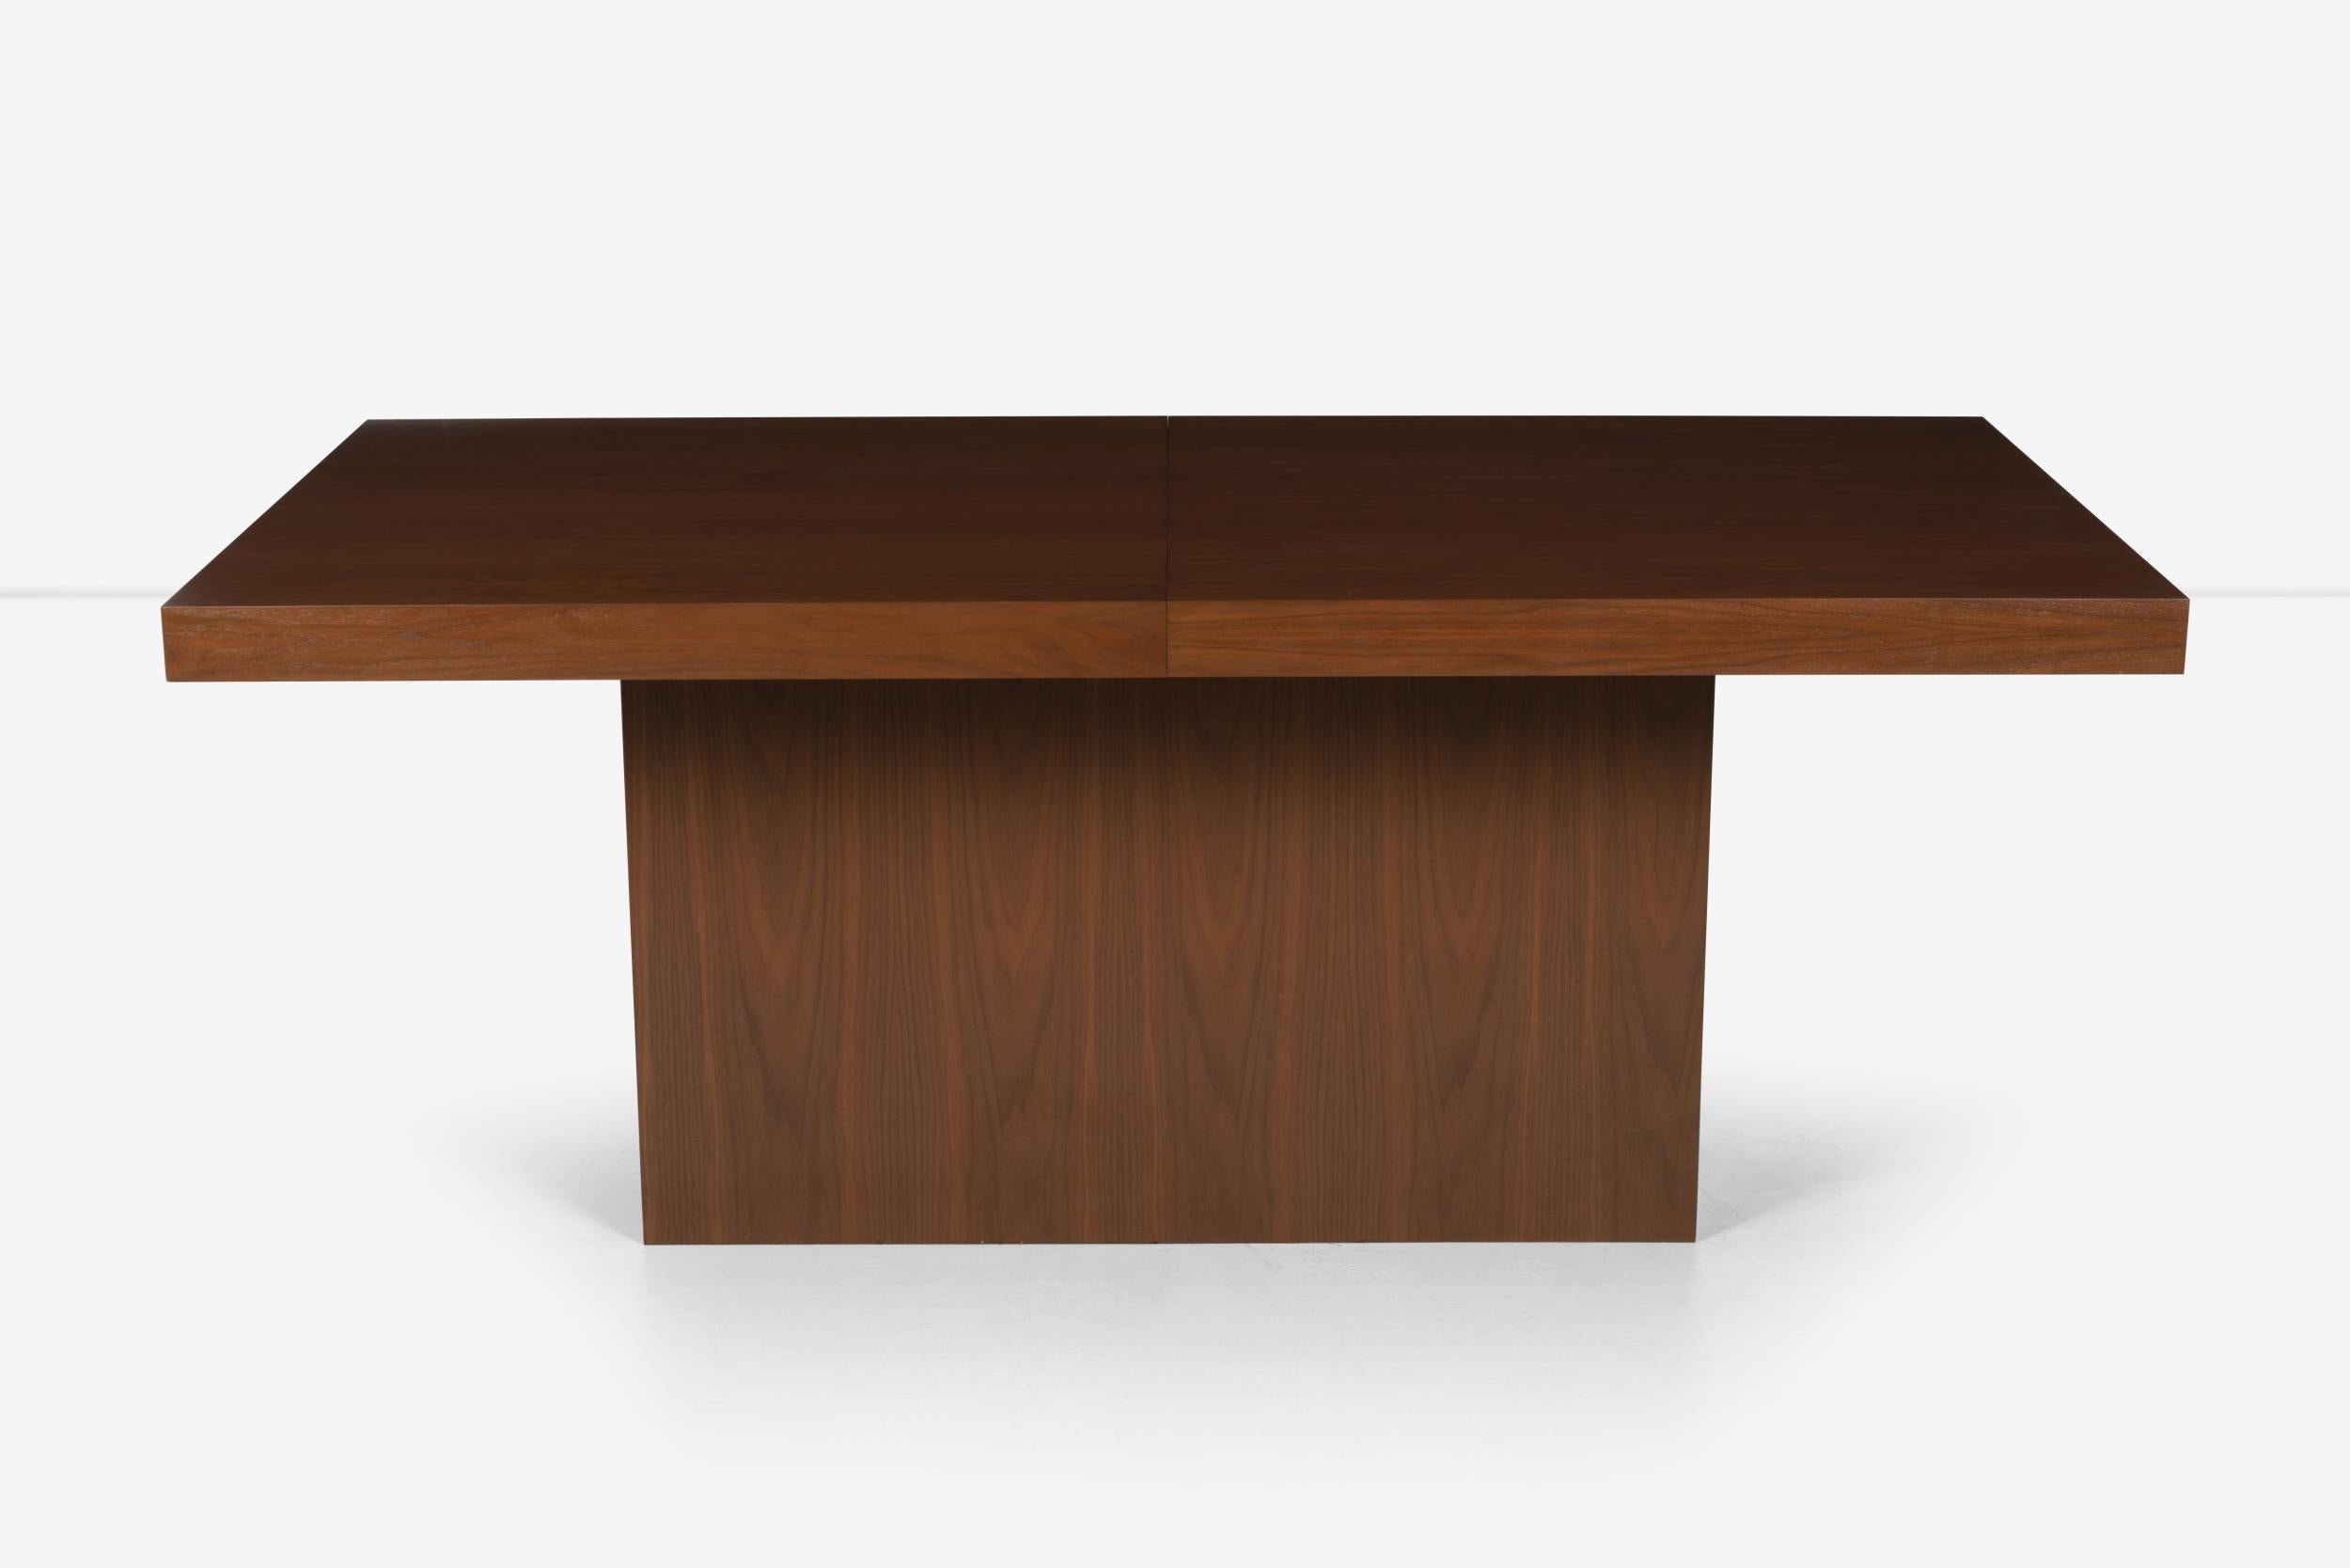 Milo Baughman style dining table, walnut lacquered veneer with pedestal base 71.50